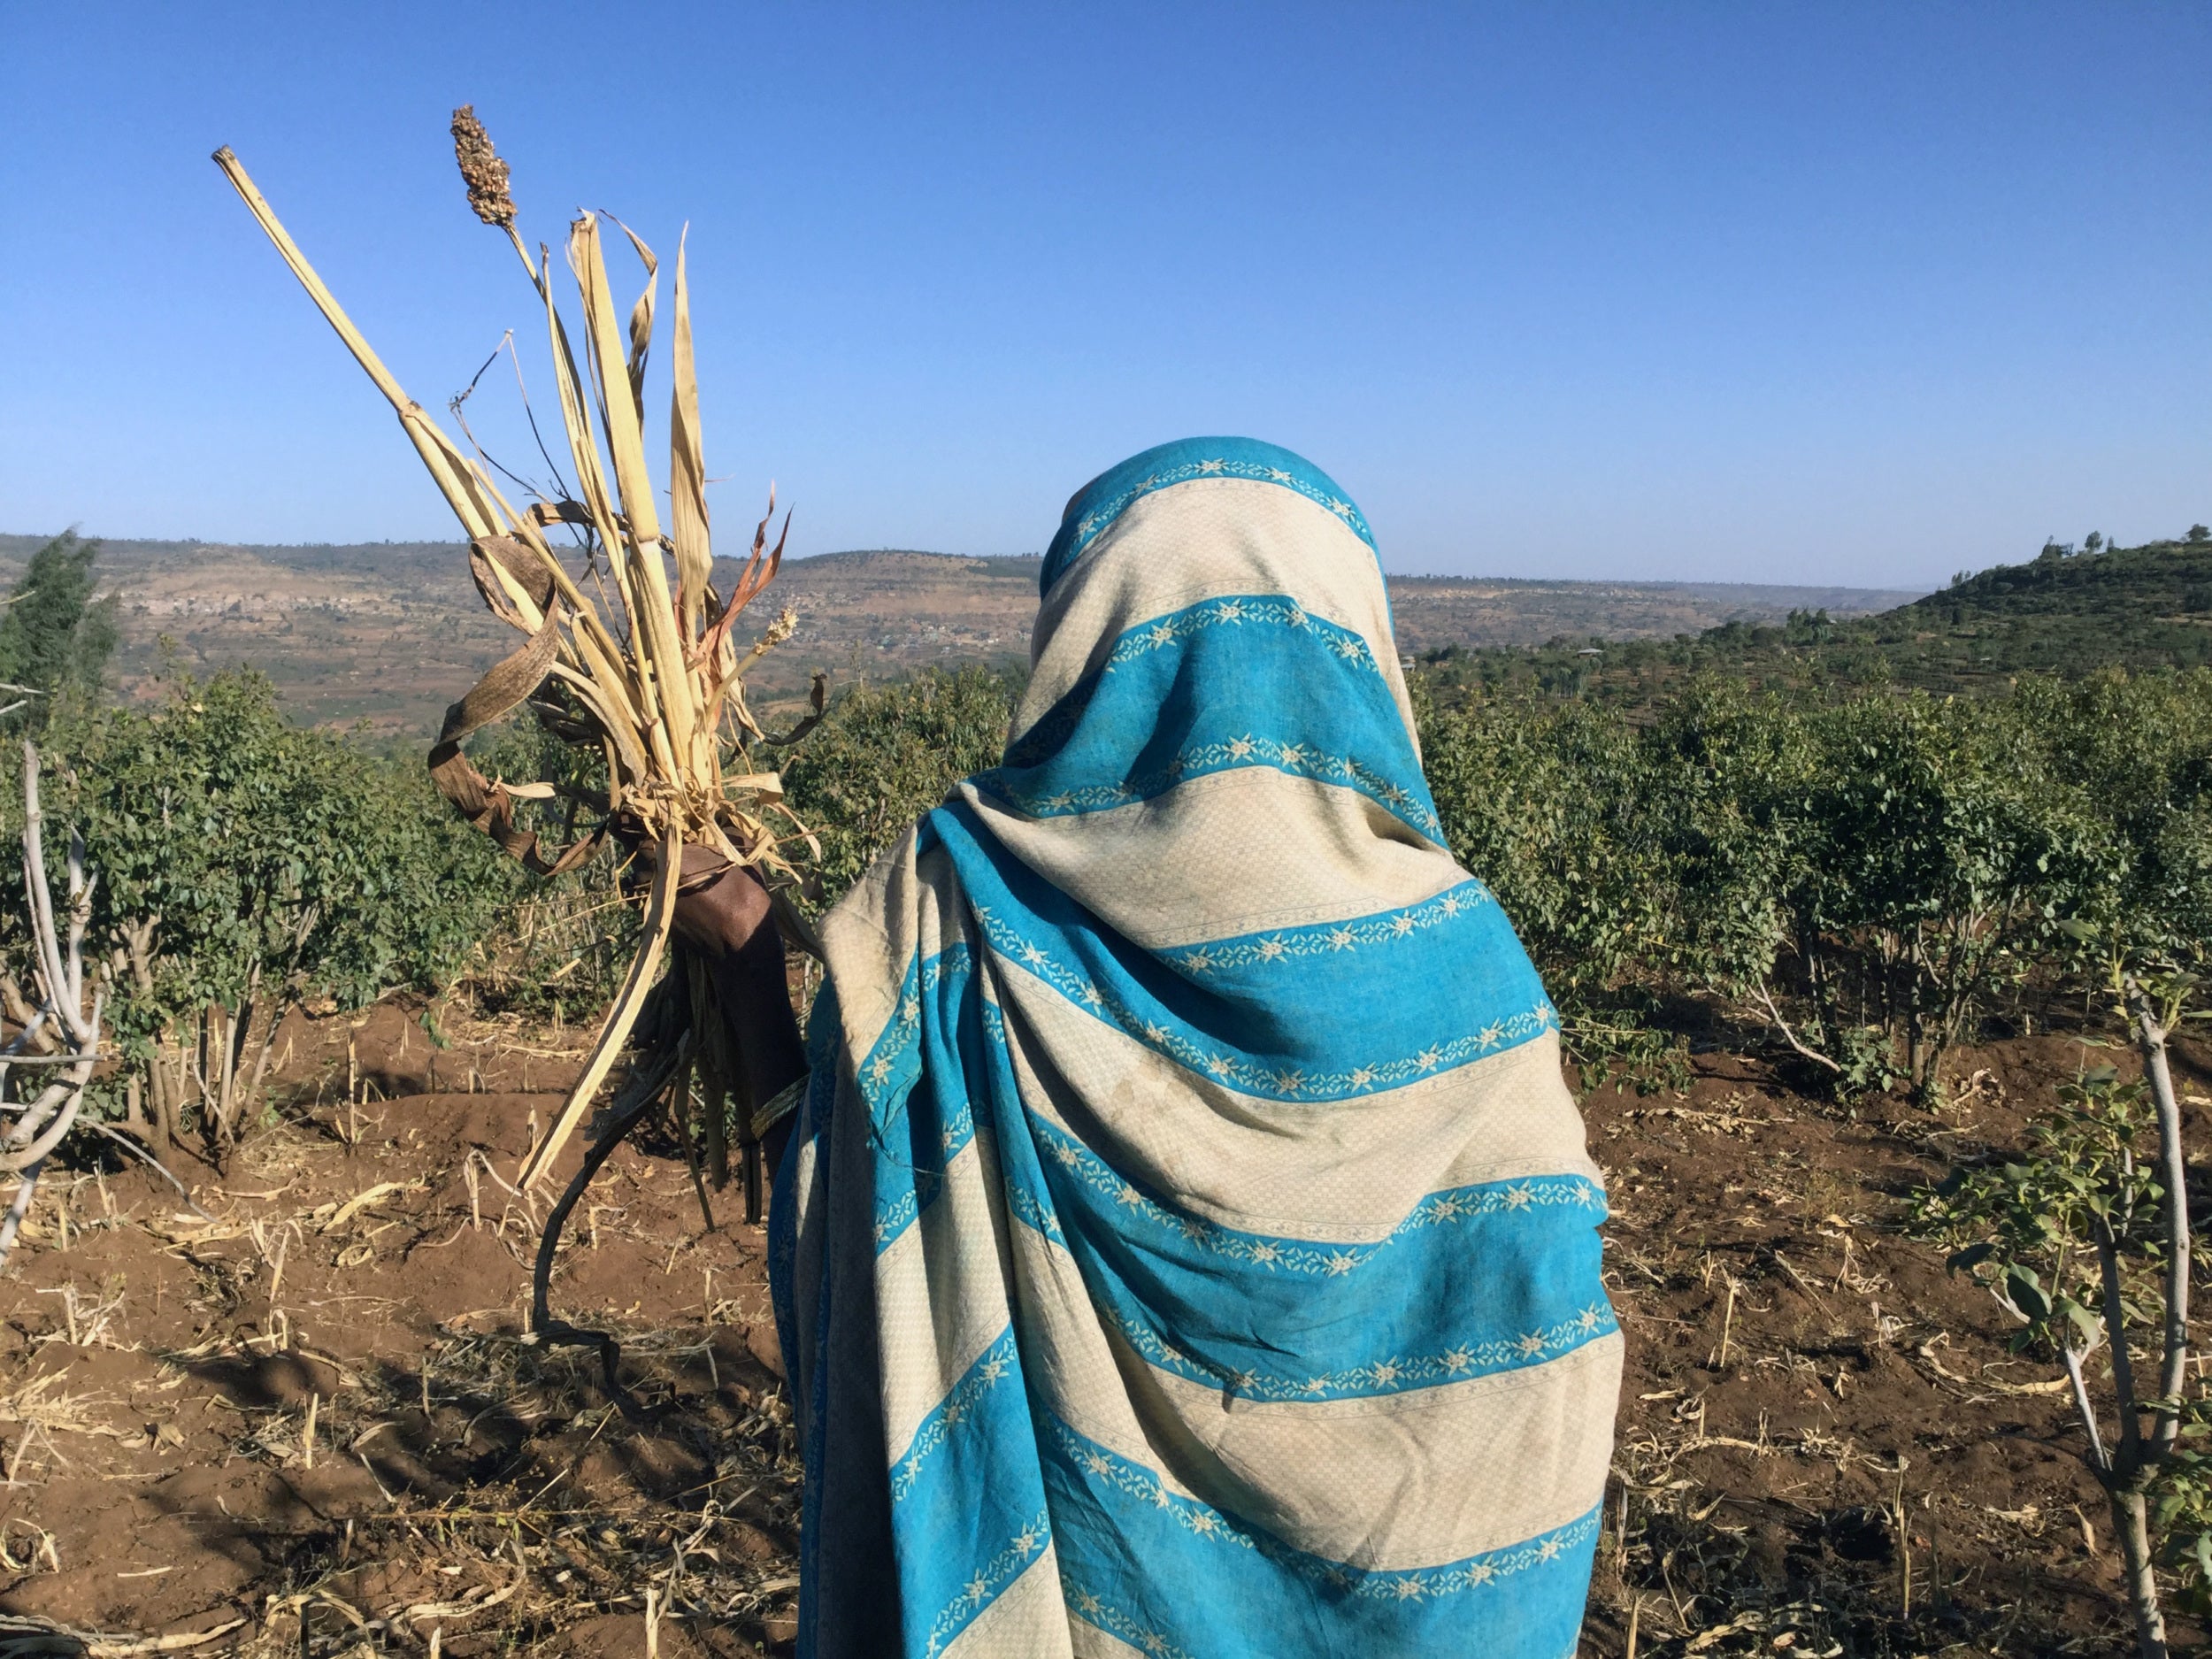 Amina Ame Usman assesses her sorghum fields and the impact of the drought on her livelihood. Photos: JackyHabib/CARE